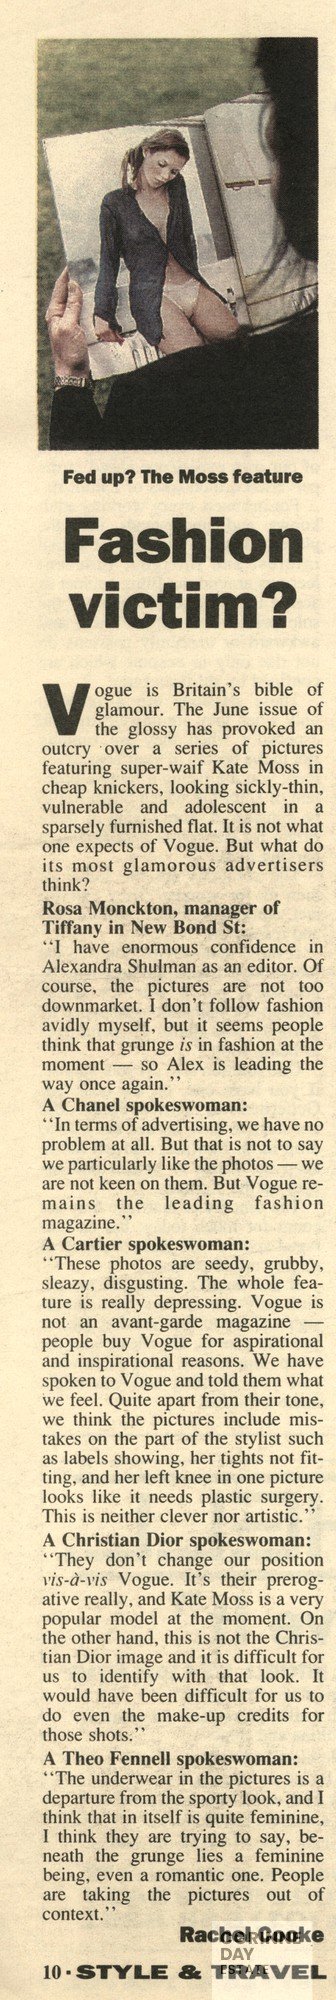 Fashion victim?, Style and Travel, 30 May 1993 — Image 1 of 1